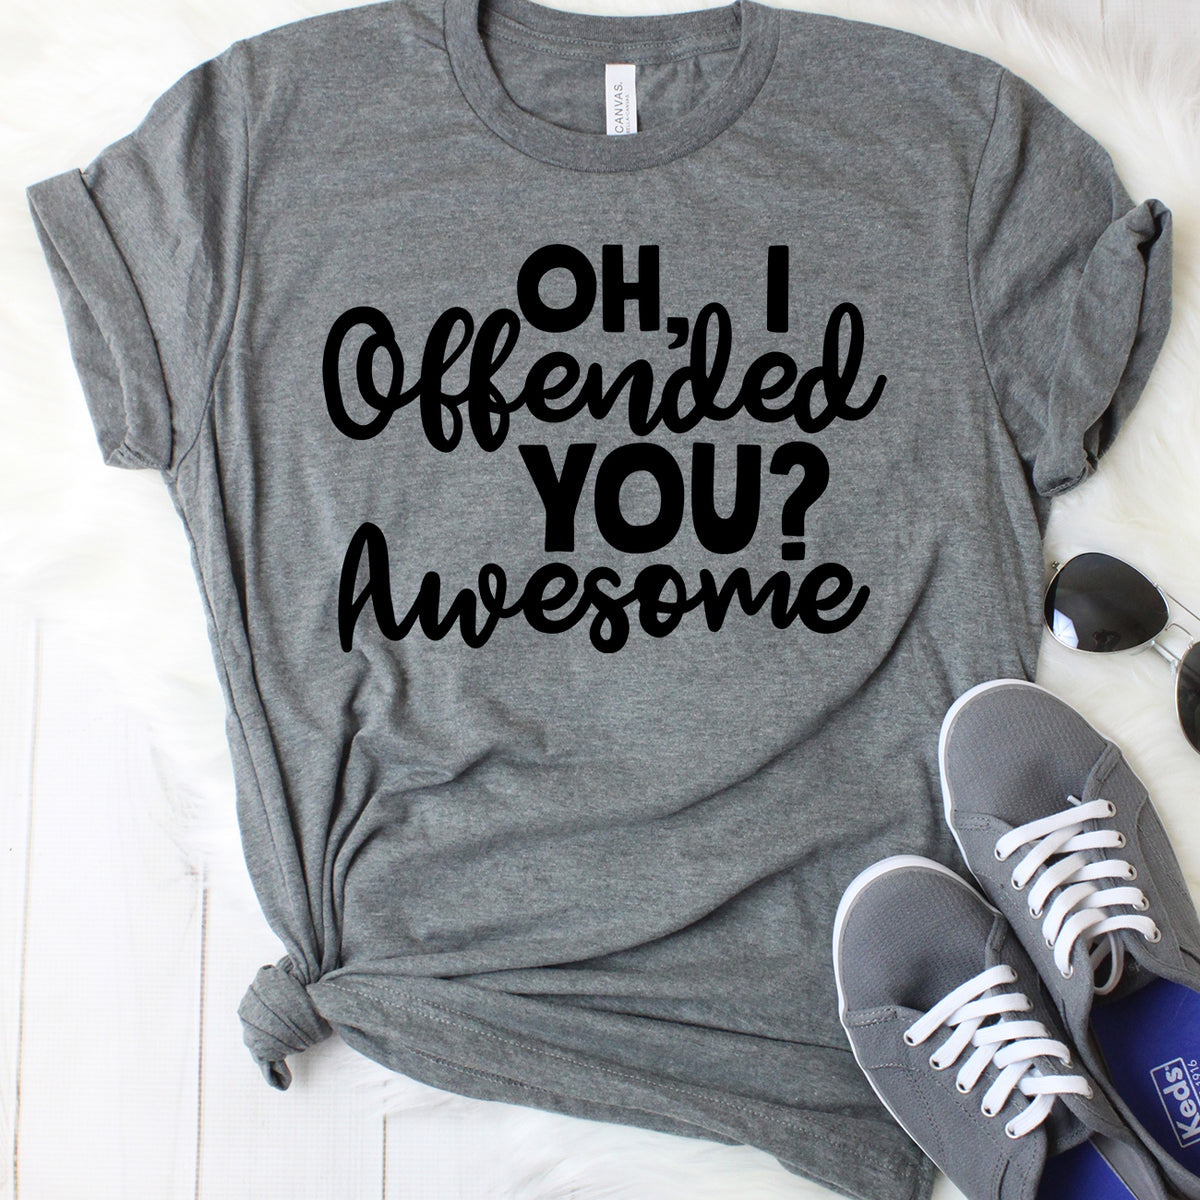 Oh, I Offended You? Awesome Dark Grey T-Shirt